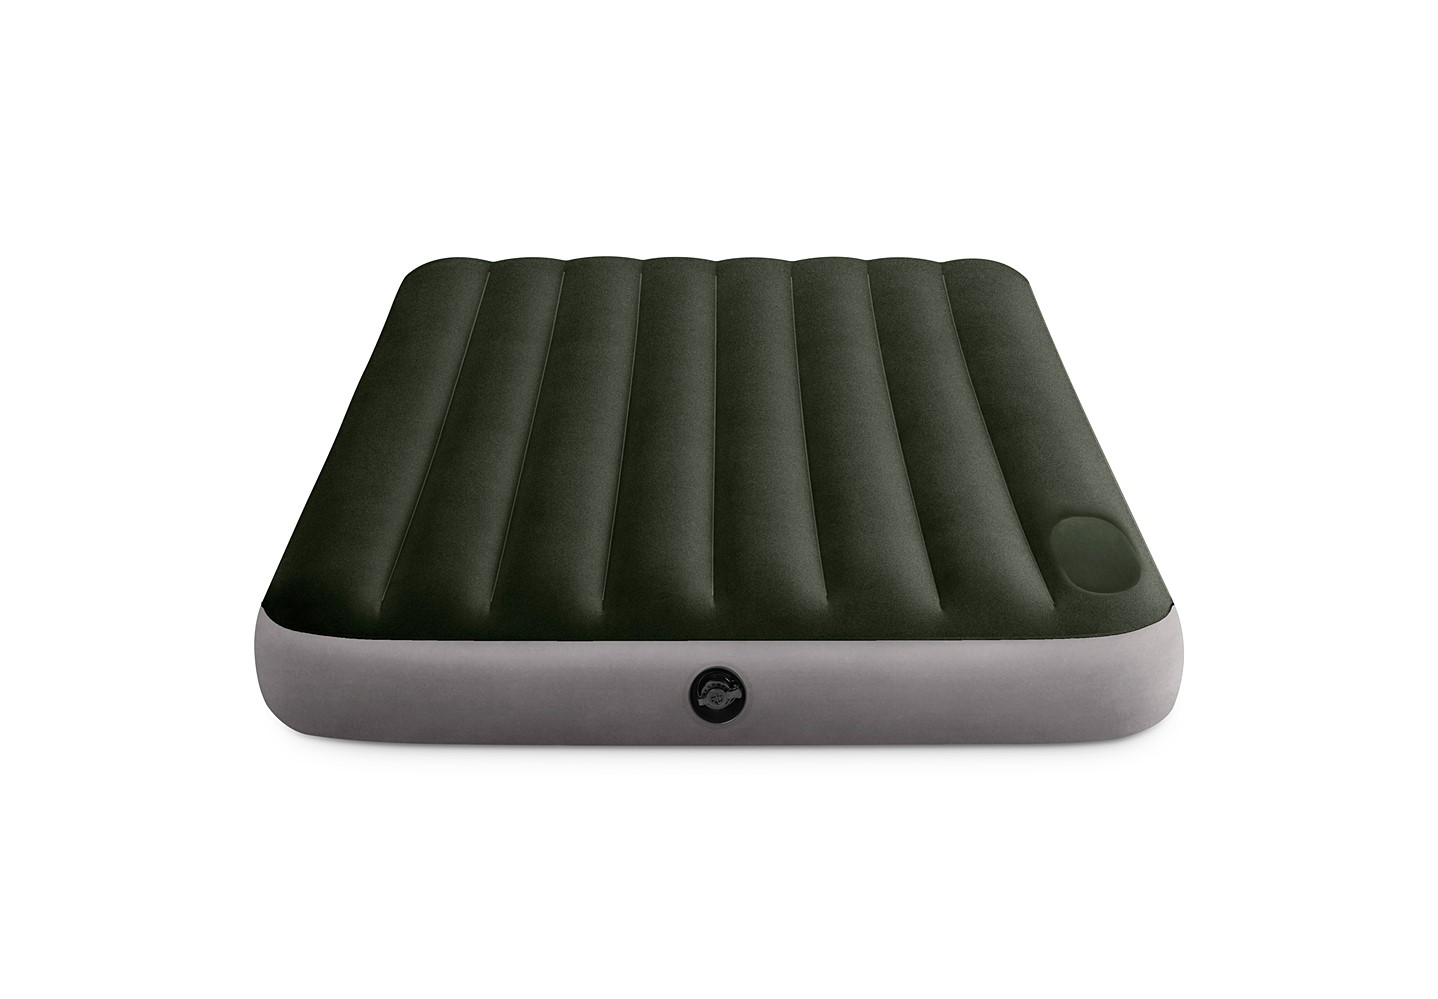 Matelas camp downy gonflable pie 2p